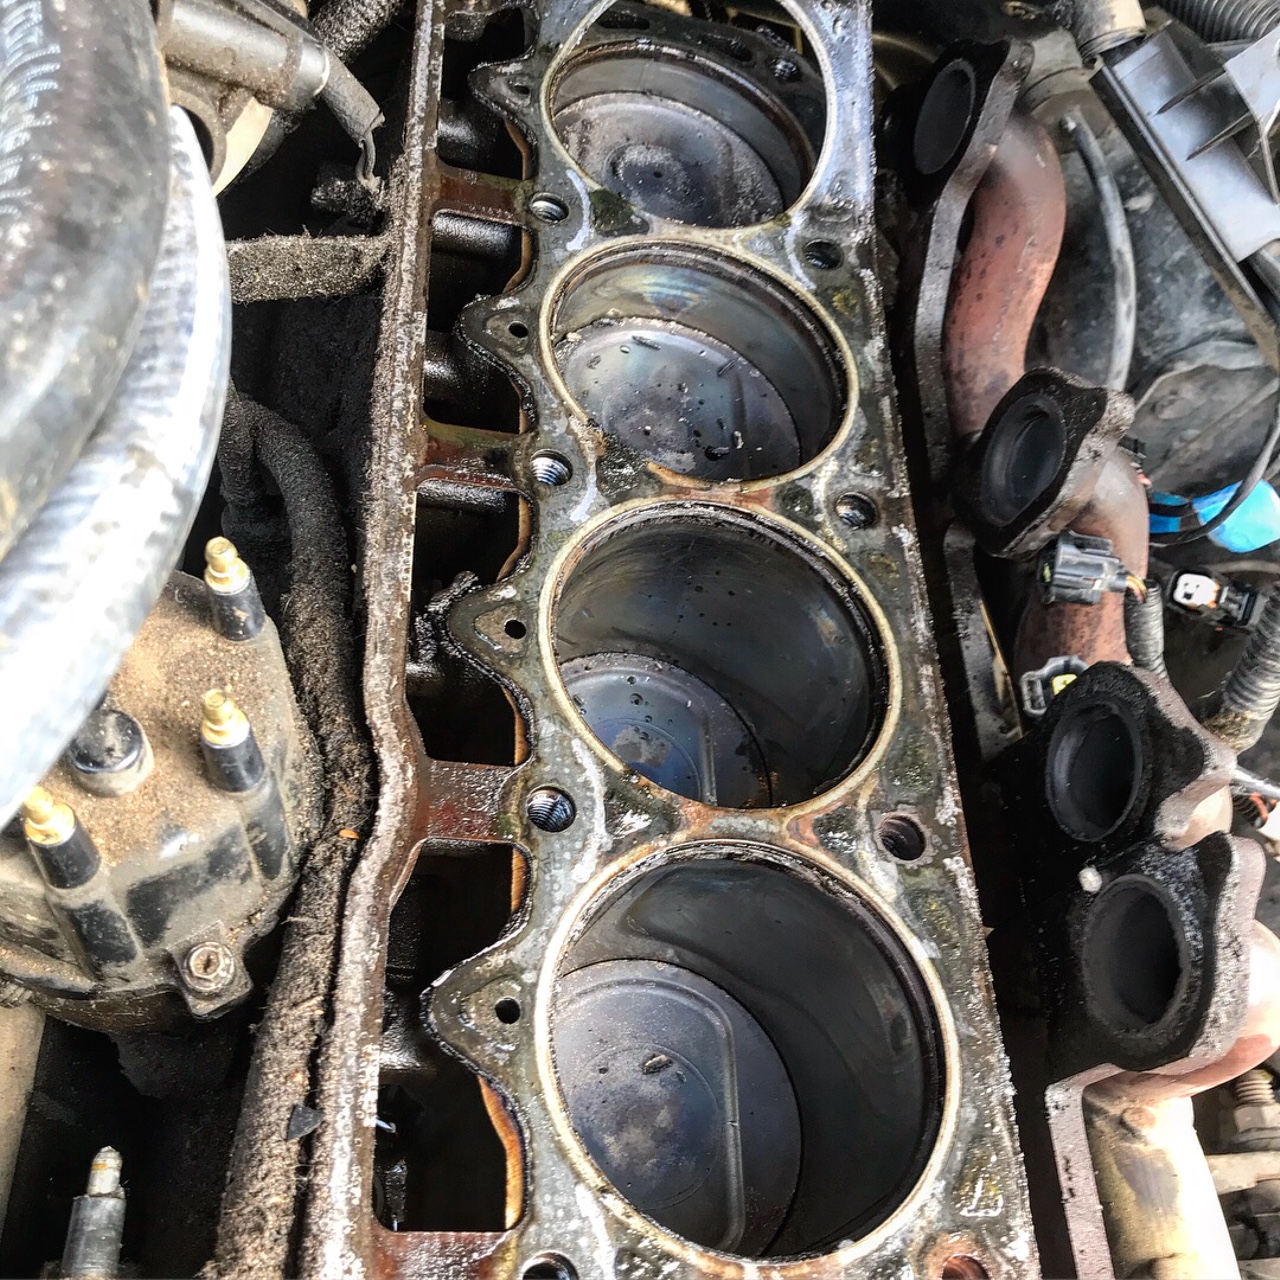 Project Cherokeeper: Blown Head Gasket! Time to Rebuild the Jeep  Engine  Top-End | Dan·nix